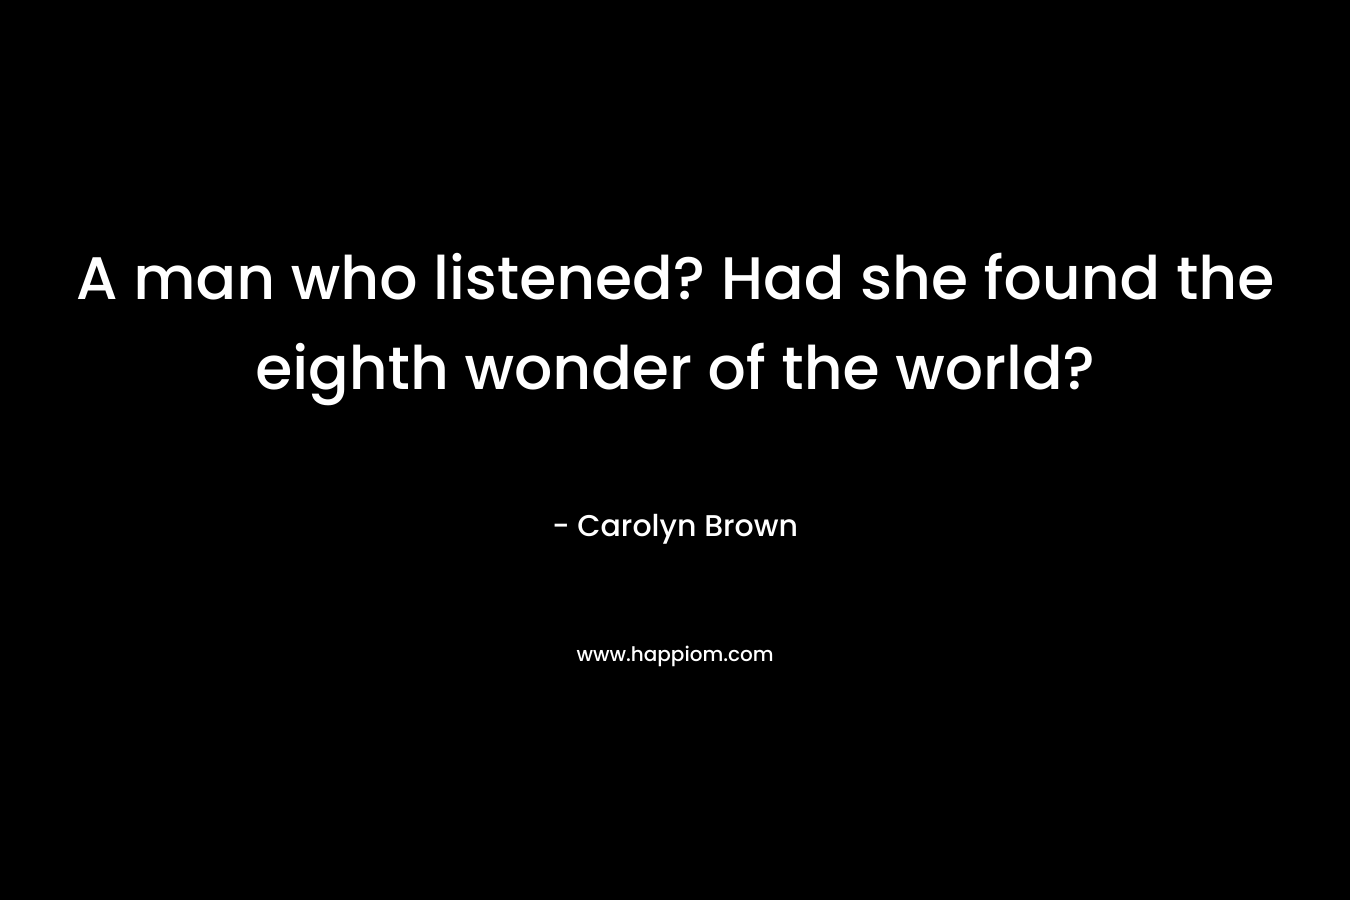 A man who listened? Had she found the eighth wonder of the world?